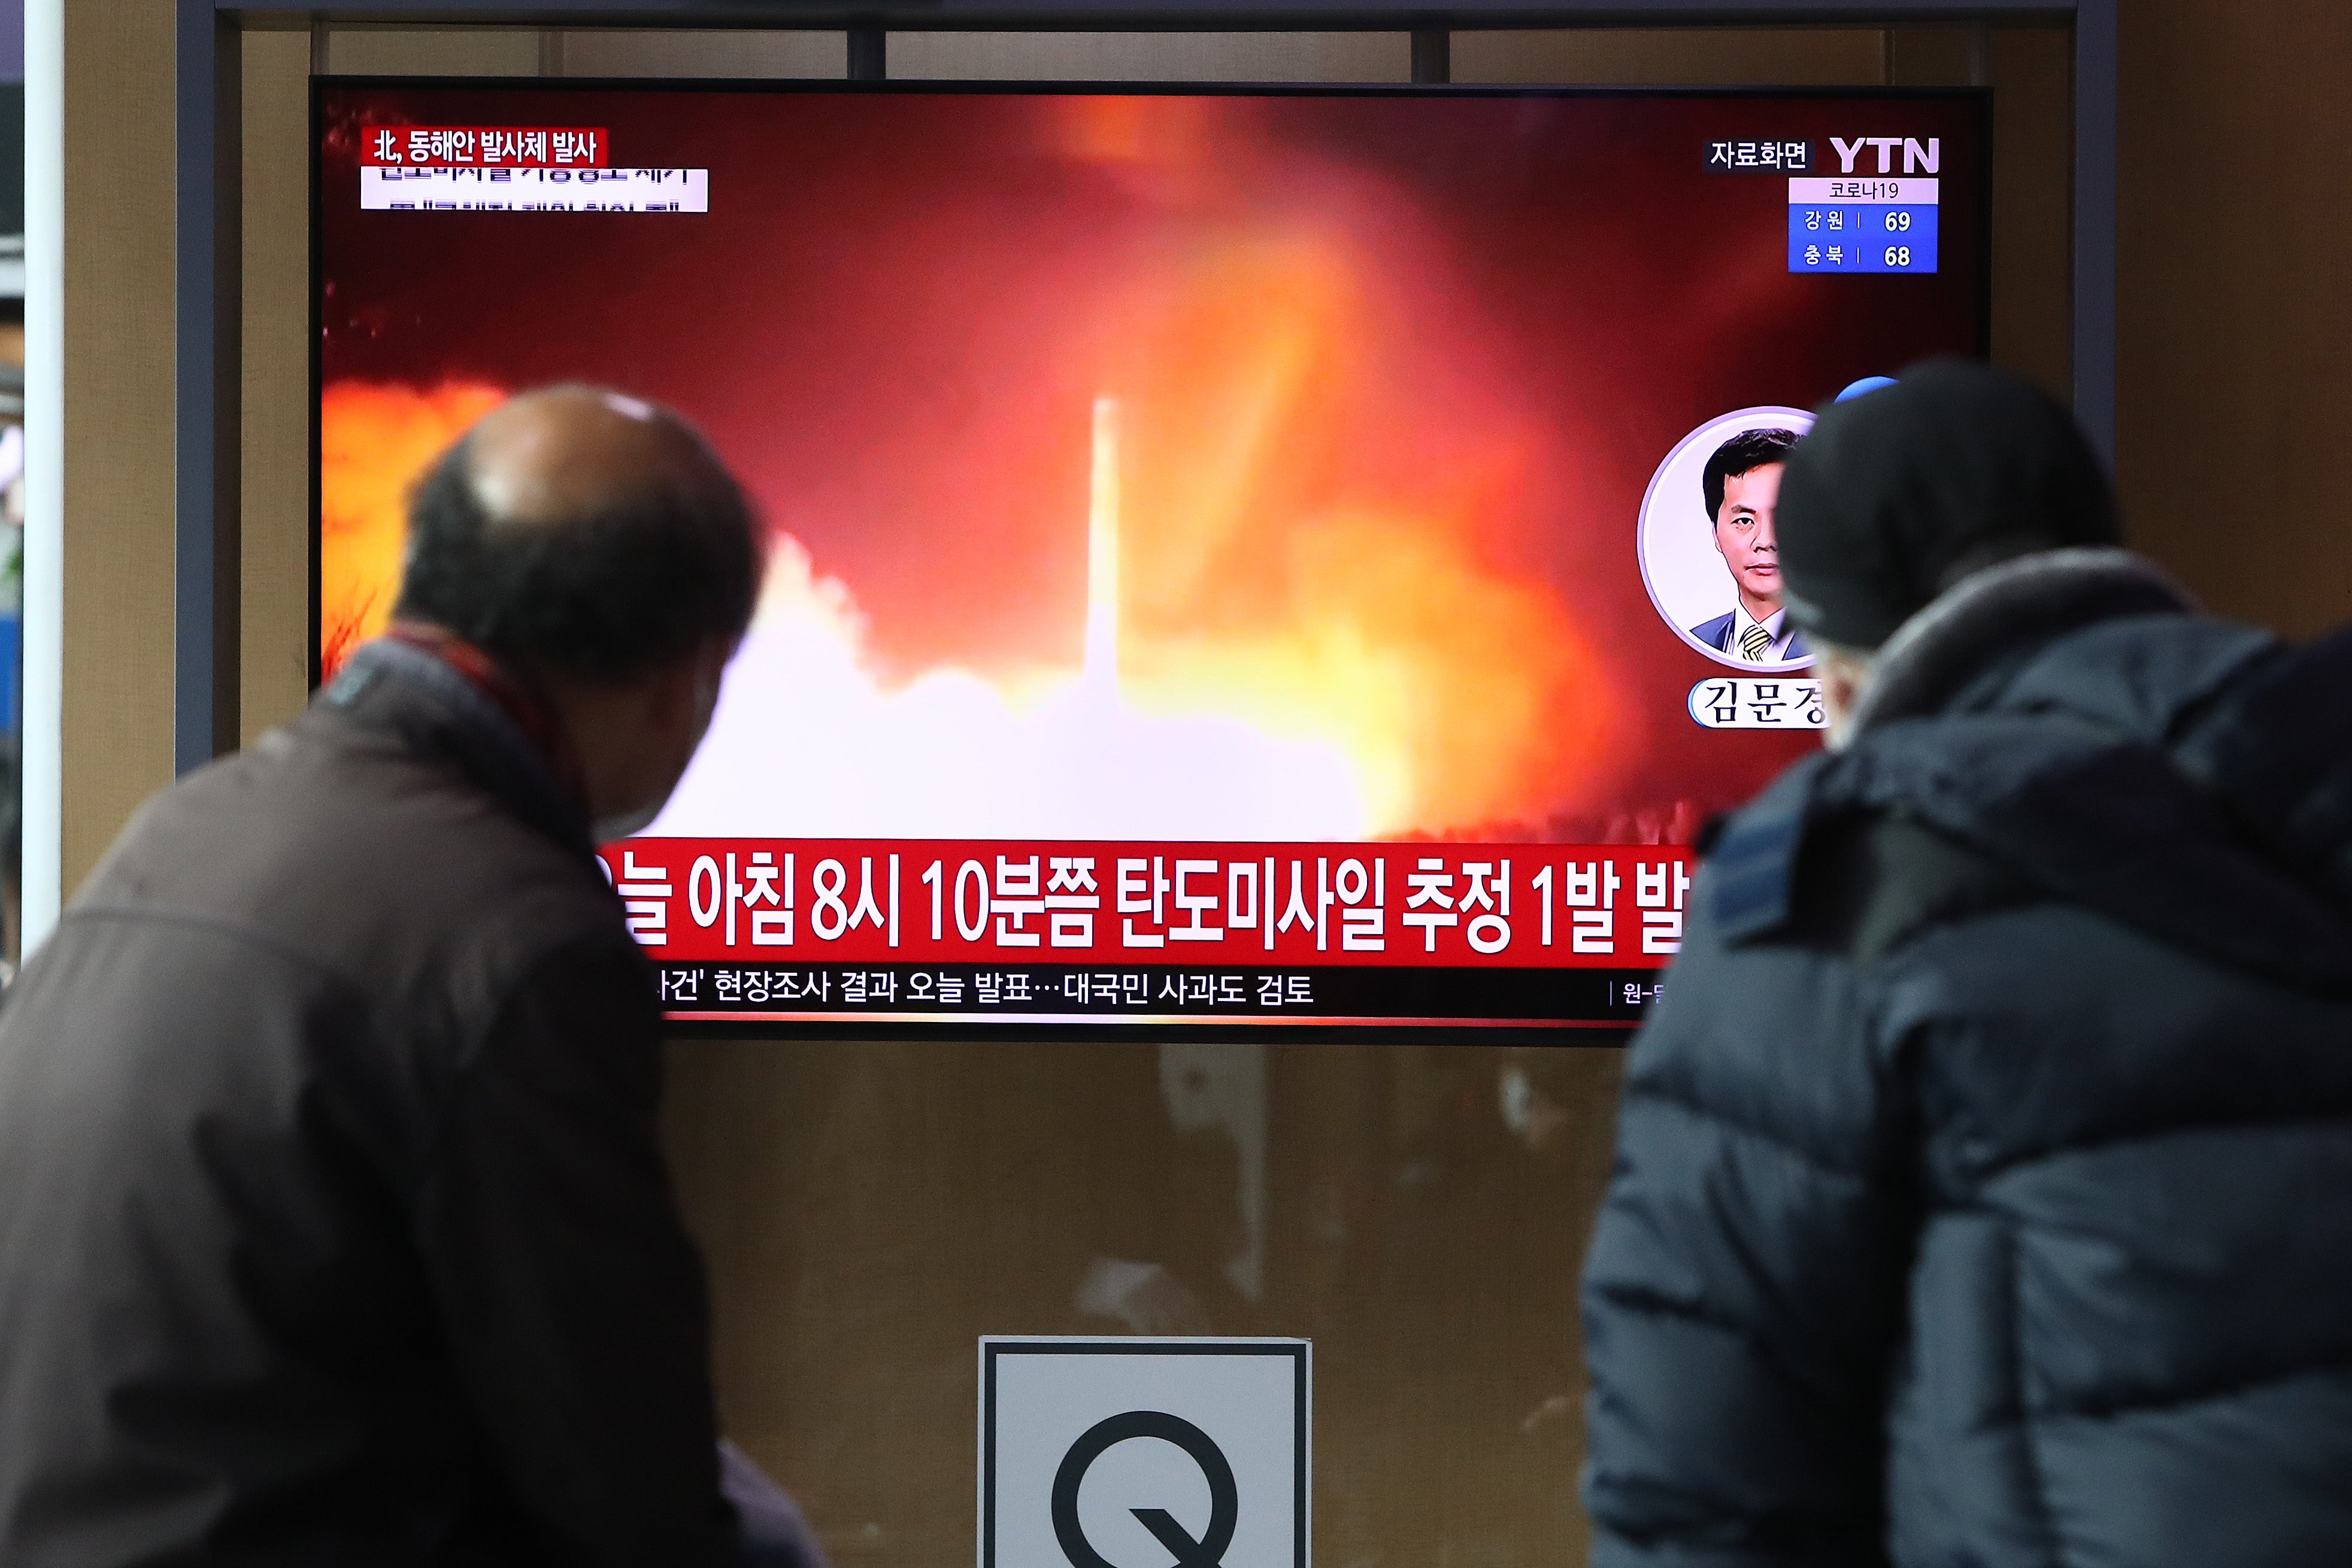 People watch a TV at the Seoul Railway Station showing a file image of a North Korean missile launch, on January 05, 2022 in Seoul, South Korea